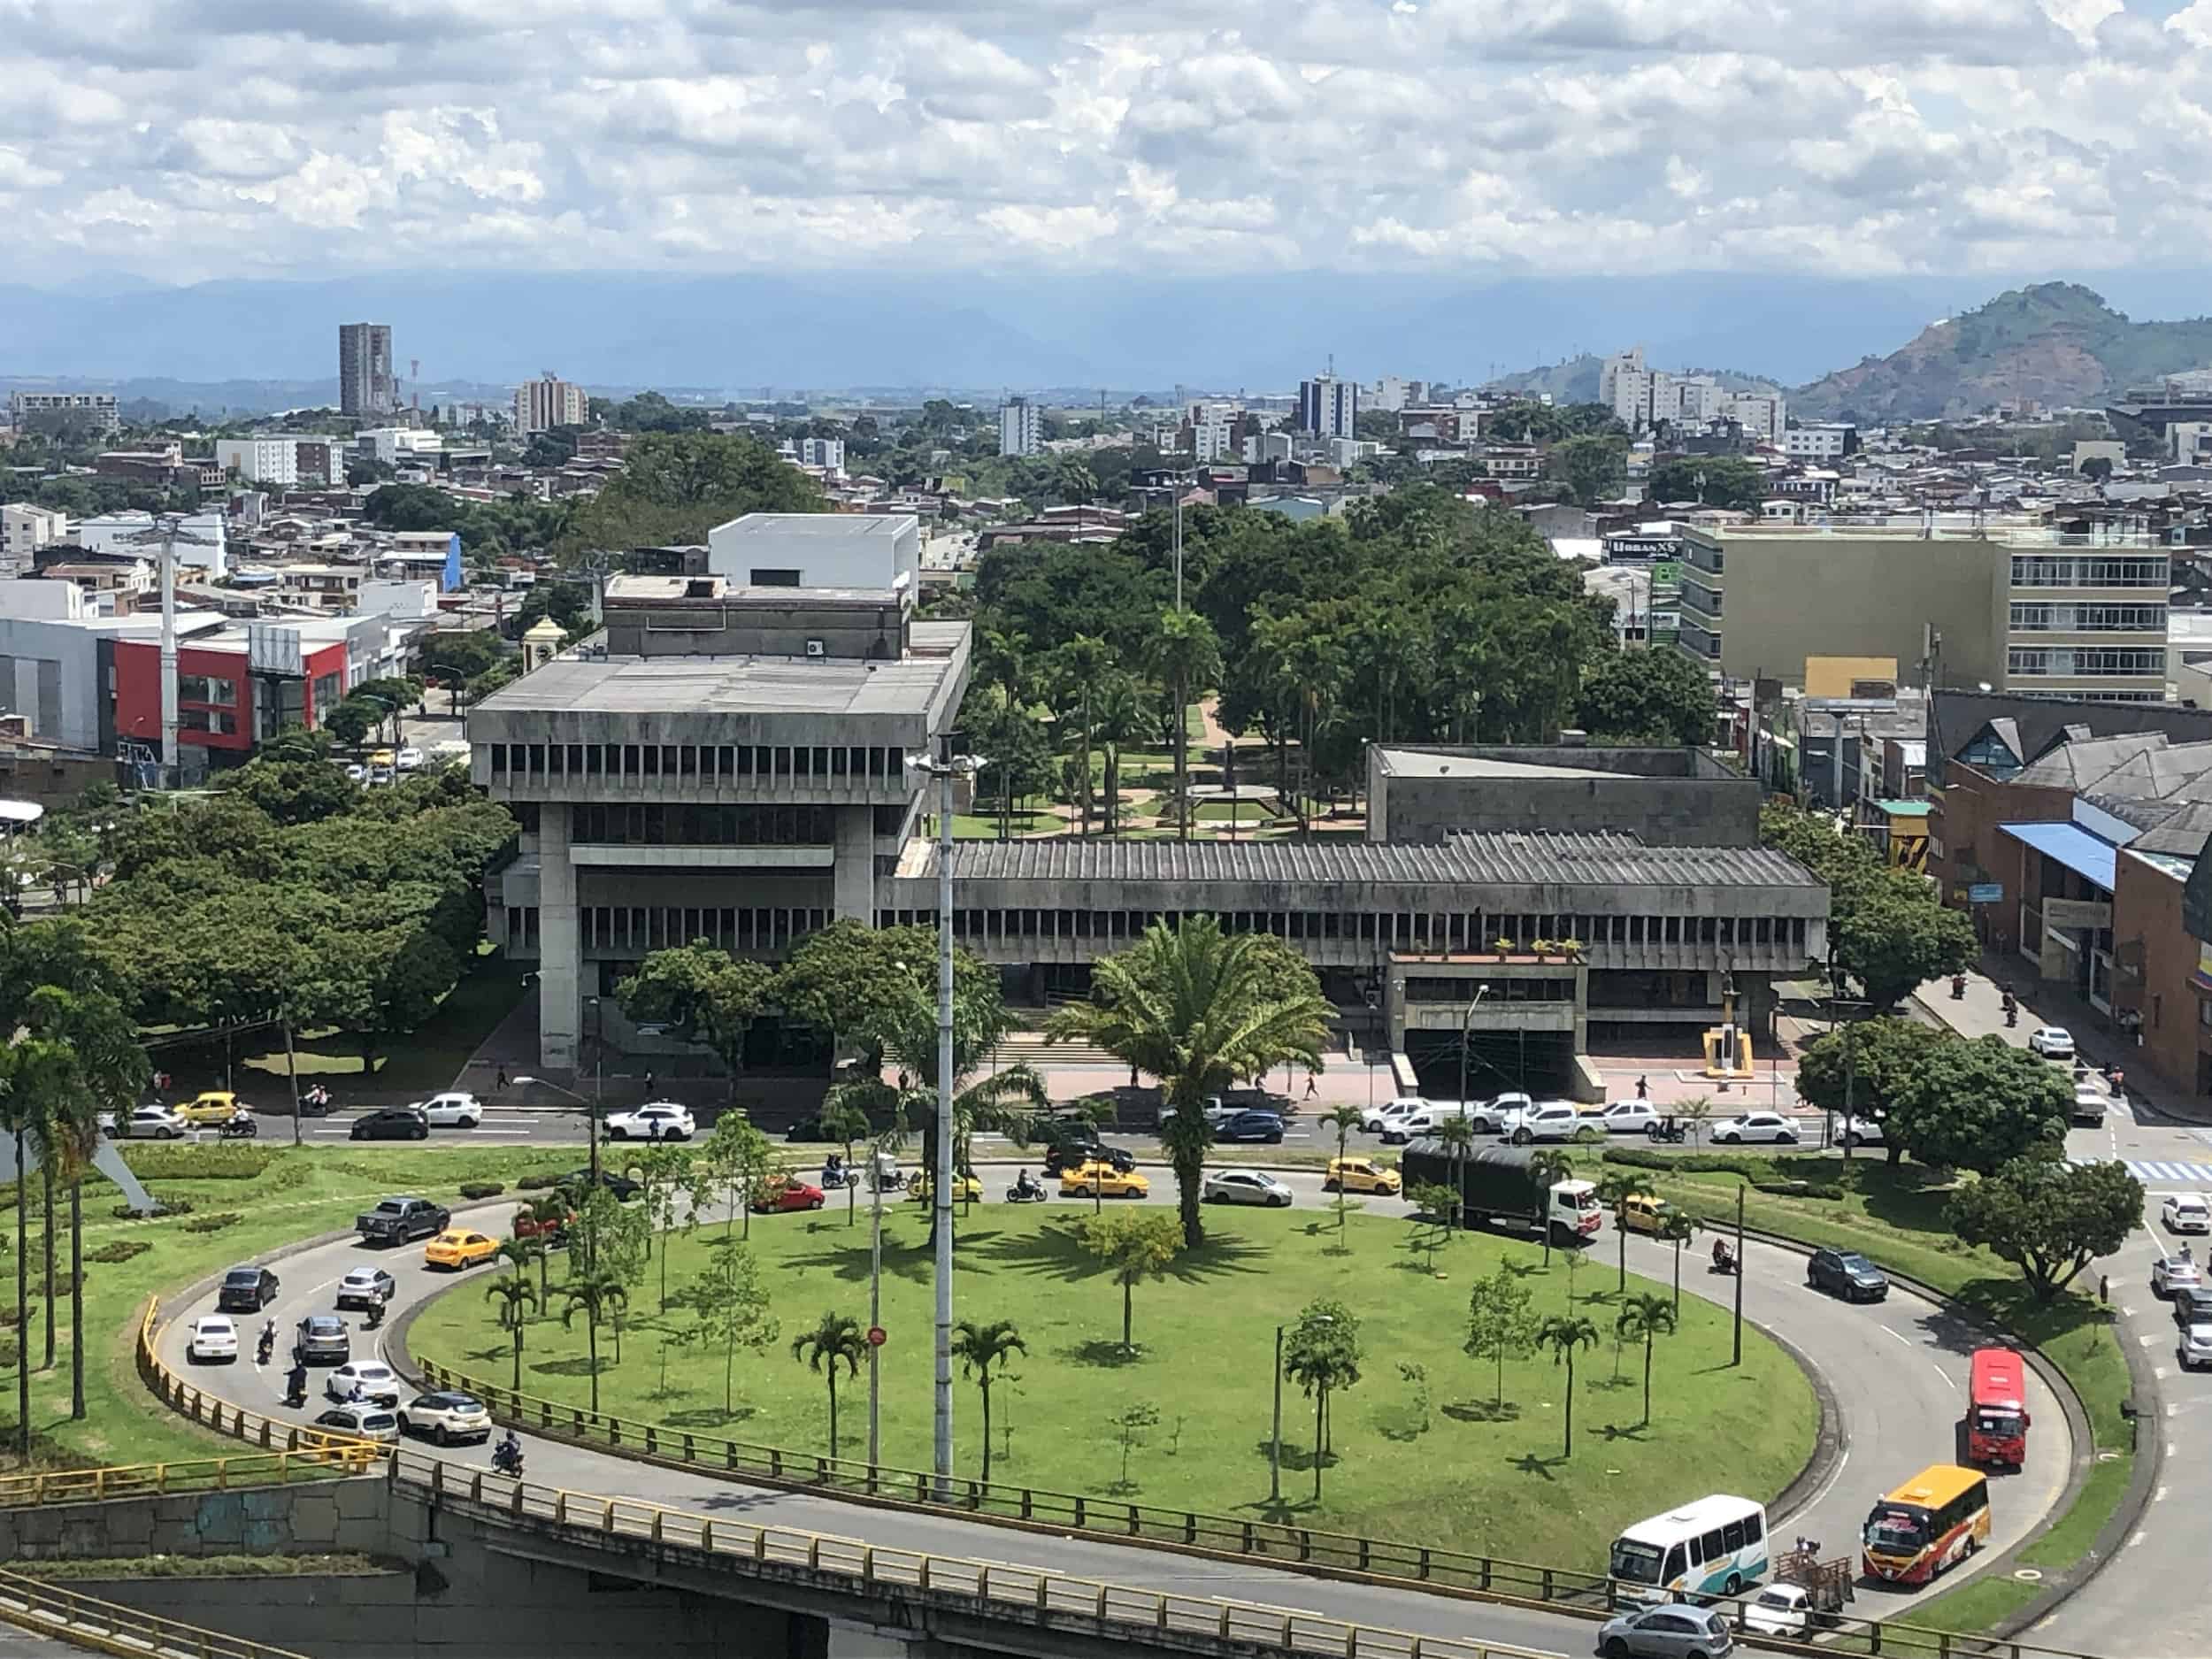 View of the Risaralda Government Building from the Movich Hotel